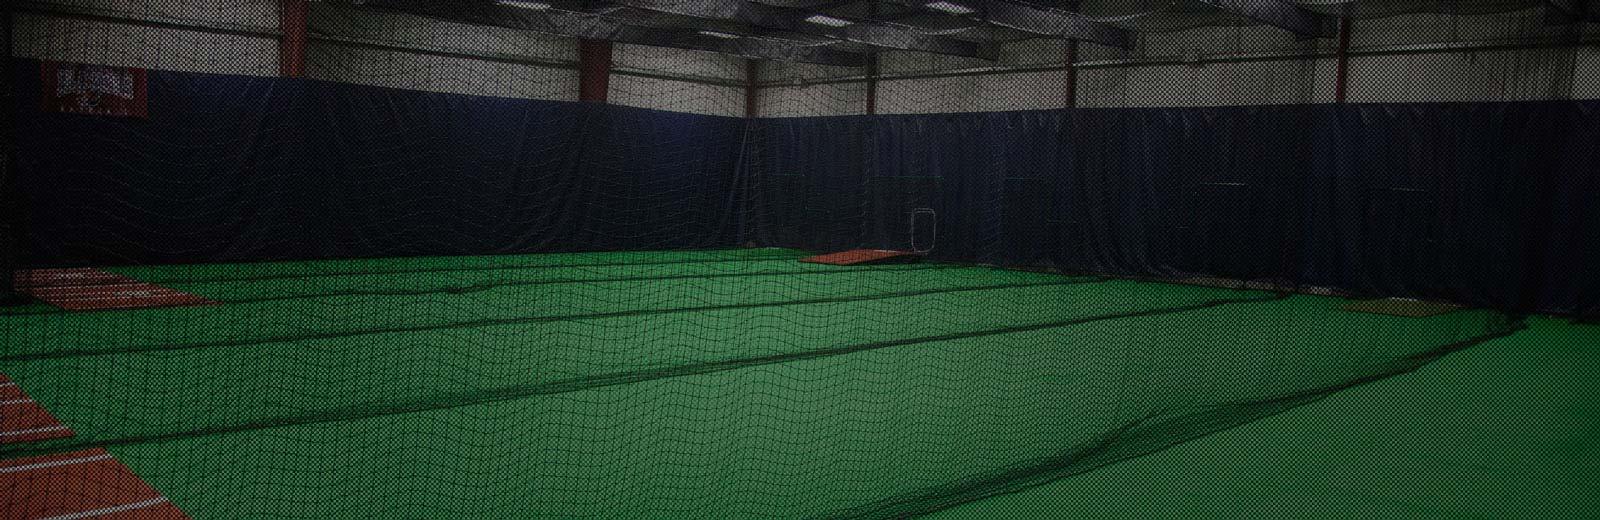 Indoor Batting Cages for Baseball & Softball